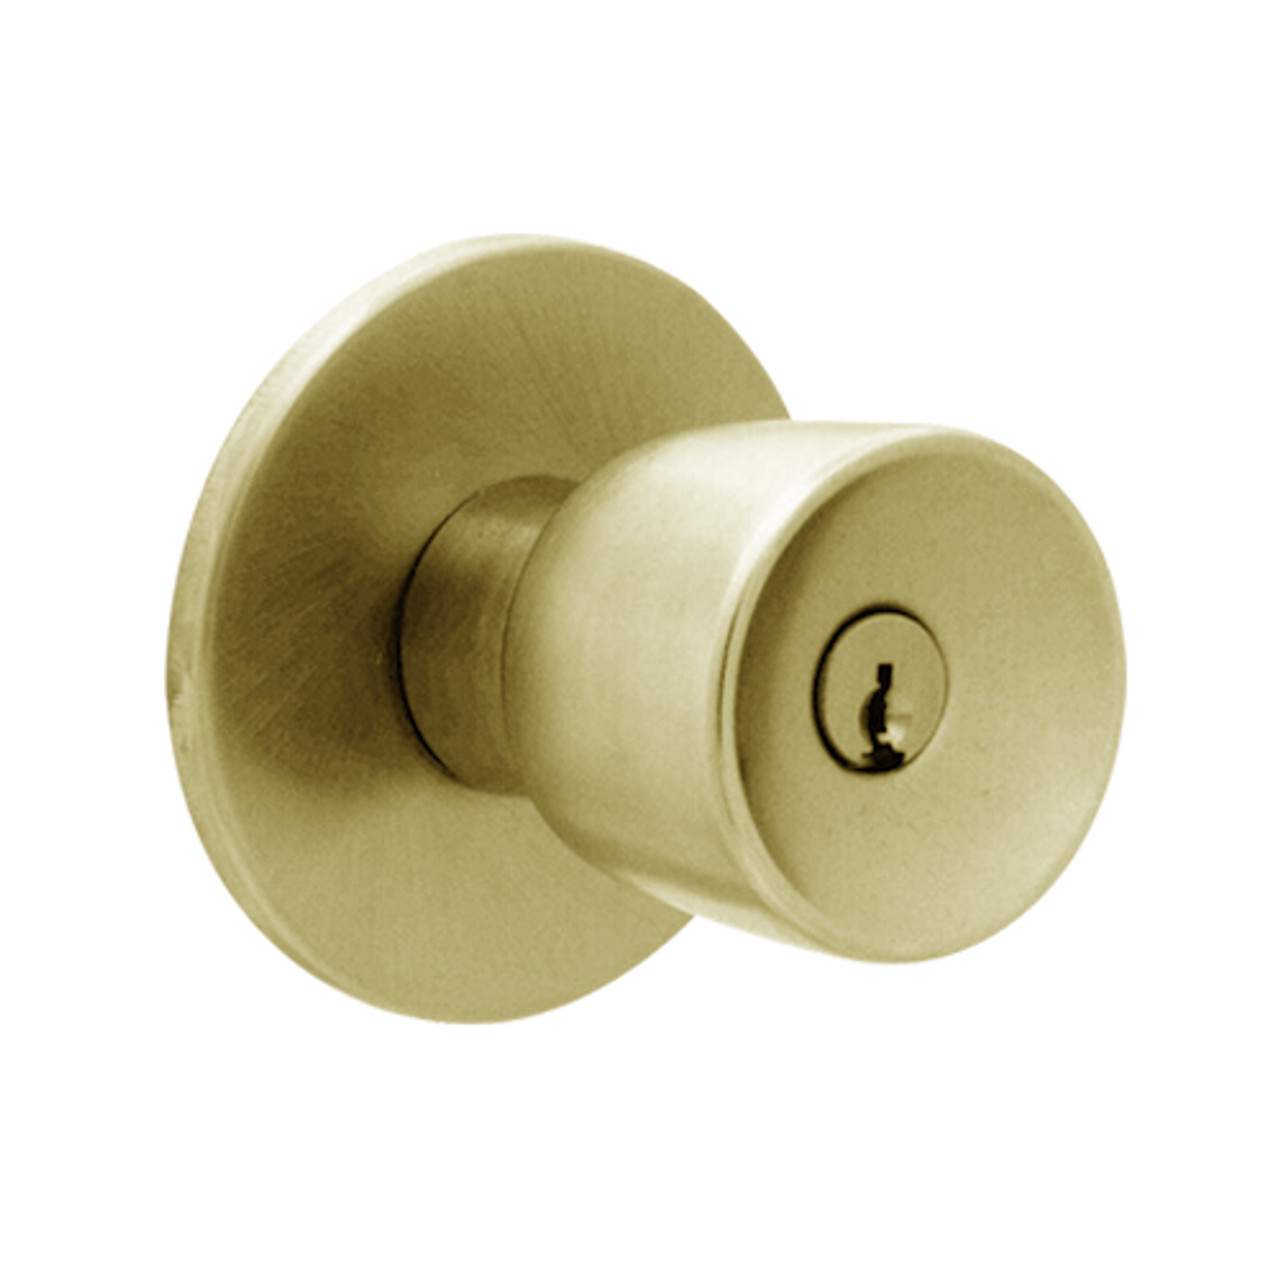 X561PD-EY-606 Falcon X Series Cylindrical Classroom Lock with Elite-York Knob Style in Satin Brass Finish